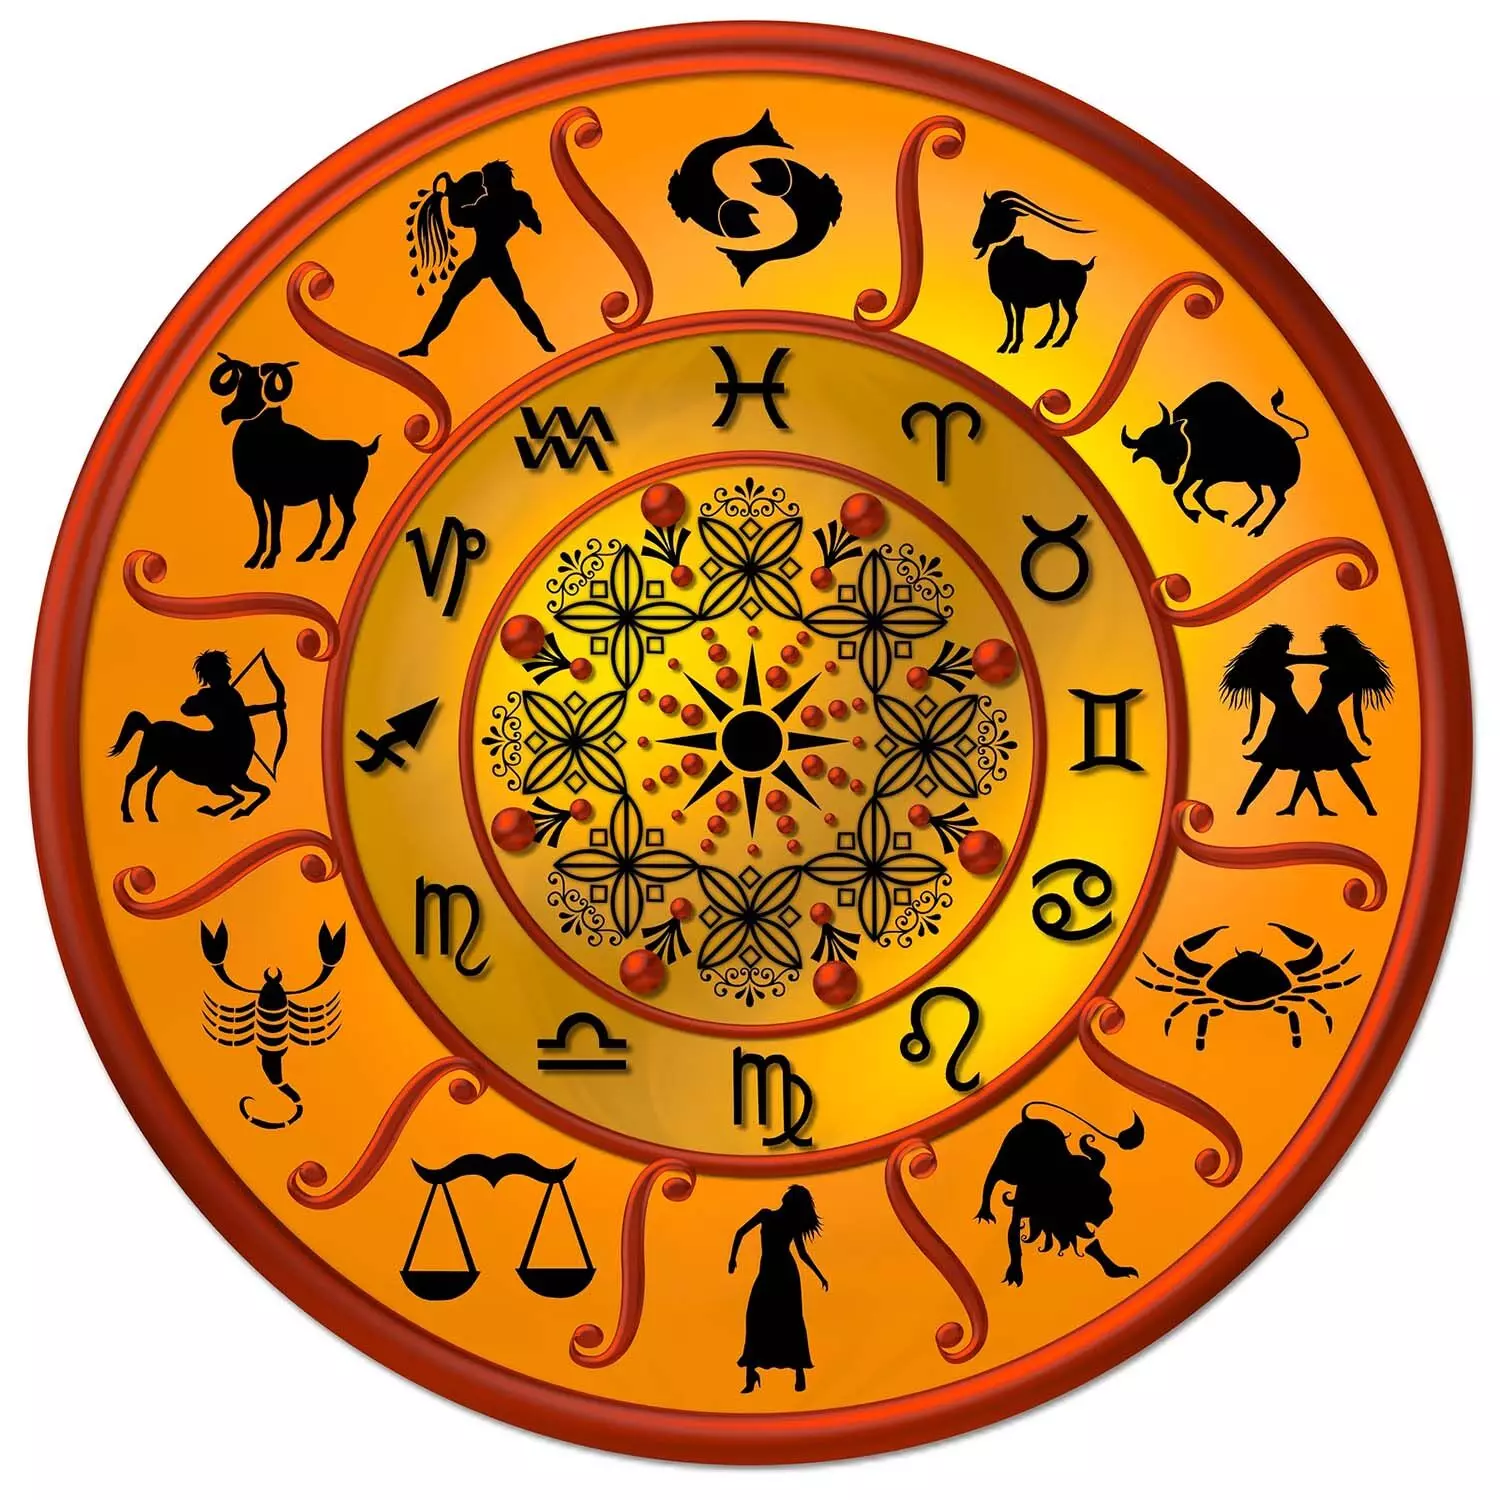 12 June – Know your todays horoscope